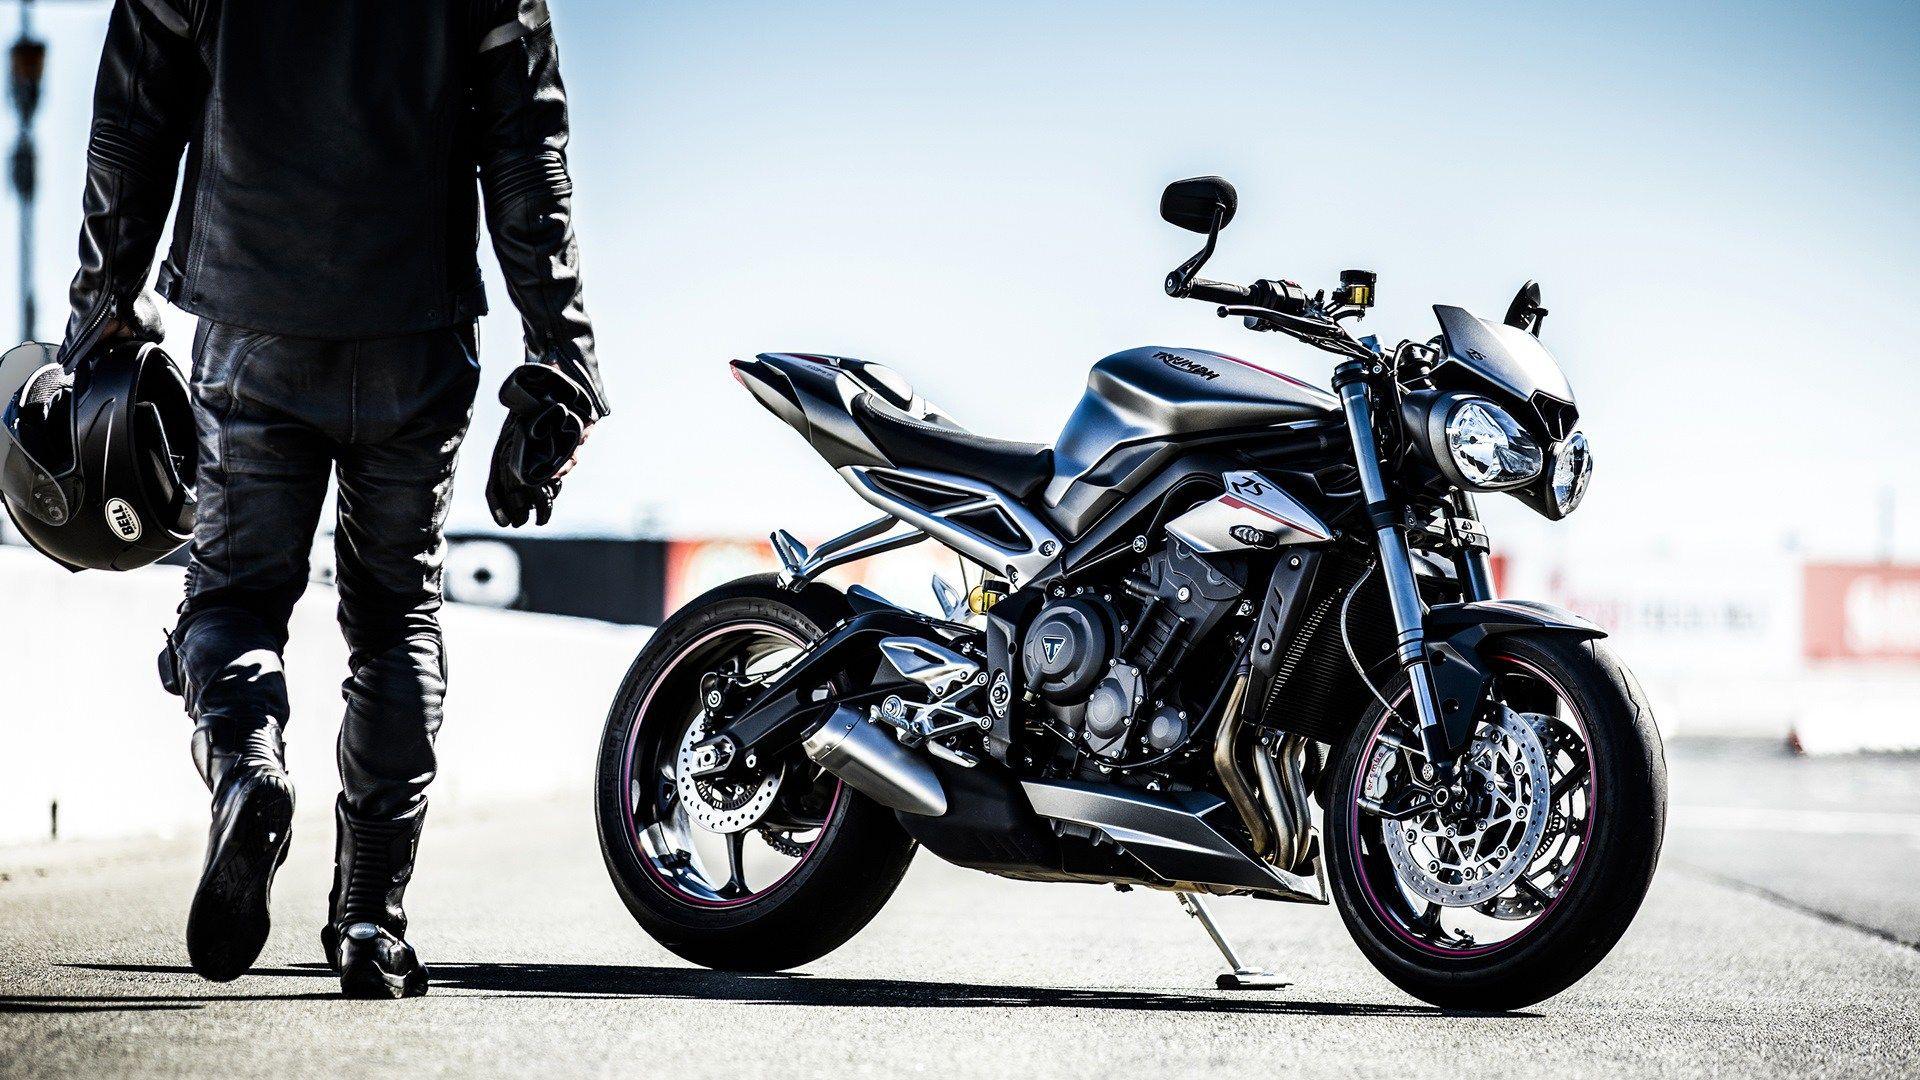 Triumph Street Triple RS makes it to India at a price of Rs